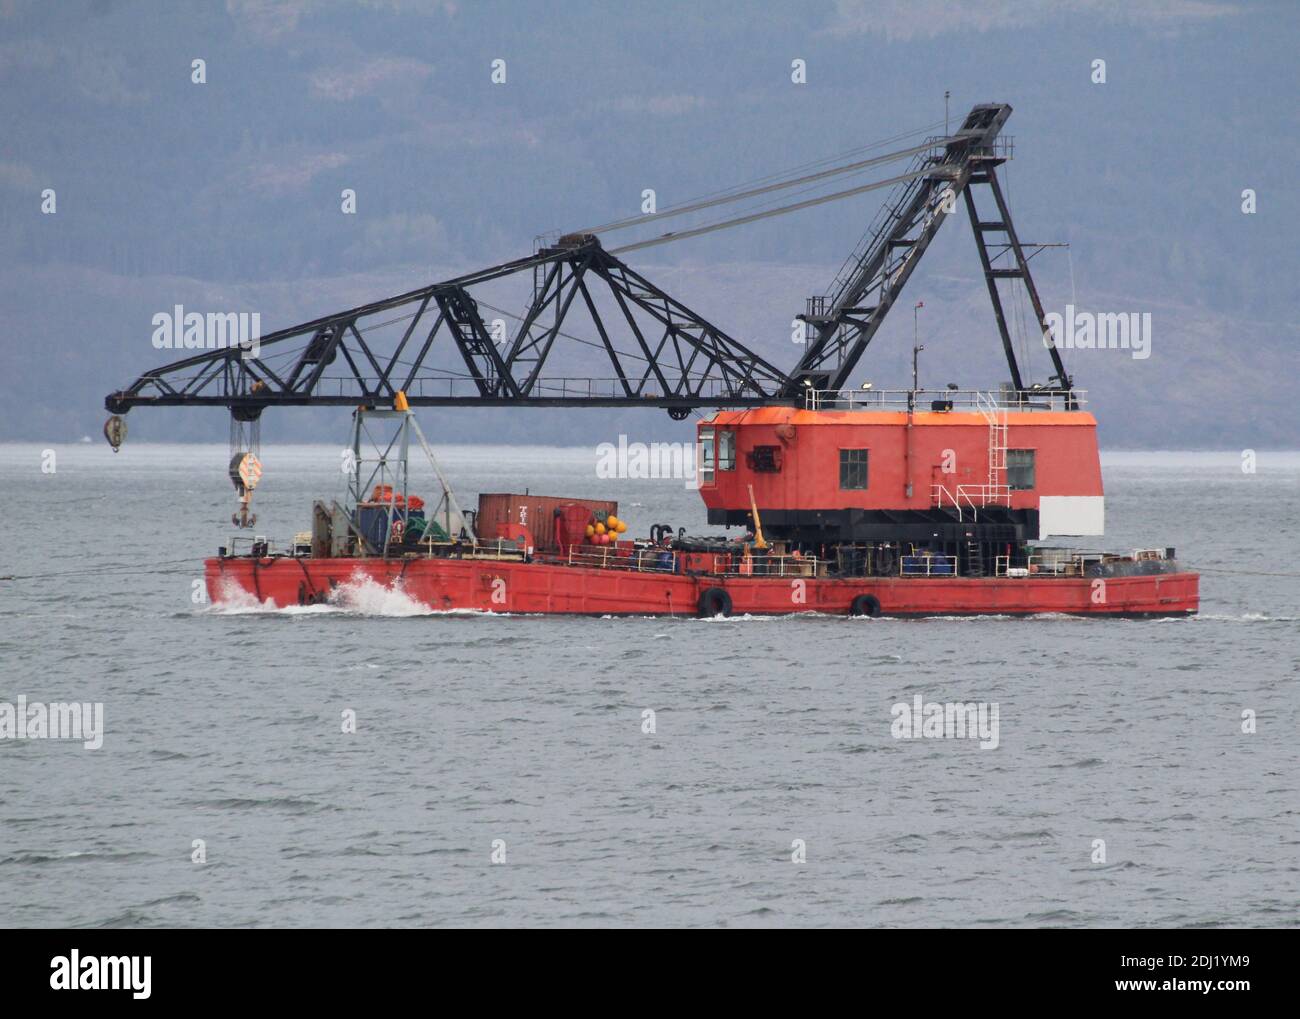 A heavy lift crane barge (BD6072) operated by Keynvor MorLift Ltd, being towed by the tug Handfast, on an outbound journey on the Firth of Clyde. Stock Photo